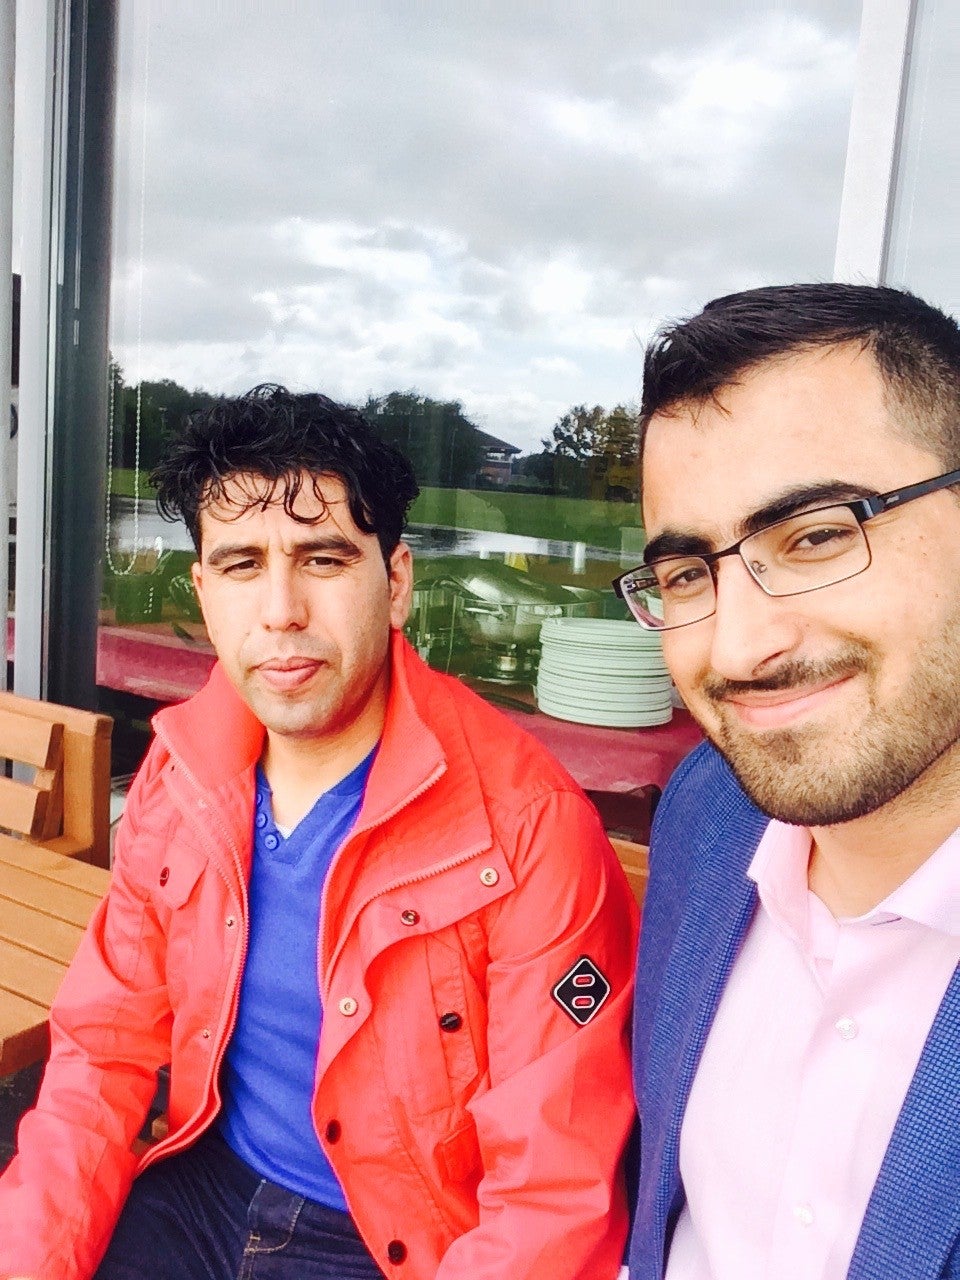 Shafiq Khasar (left) has been served with a deportation notice to Afghanistan. He is pictured here with his friend Gulwali Passarlay.